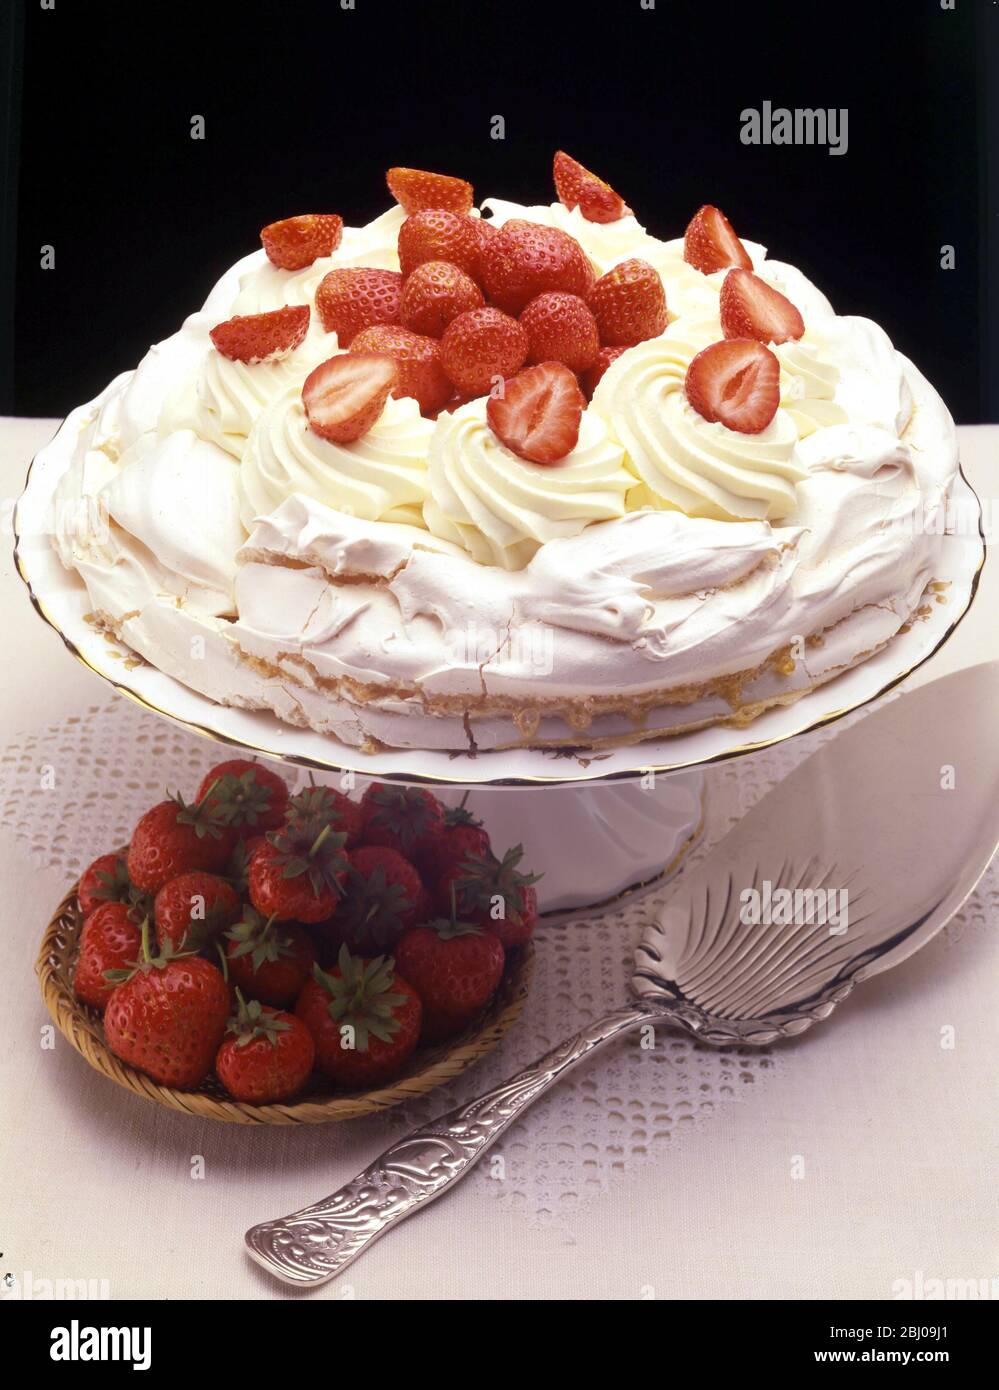 Strawberry Pavlova - The meringue-based dessert, Pavlova, is named after the Russian ballerina Anna Pavlova. The dessert is believed to have been created in honour of the dancer either during or after one of her tours to Australia and New Zealand in the 1920s. Stock Photo